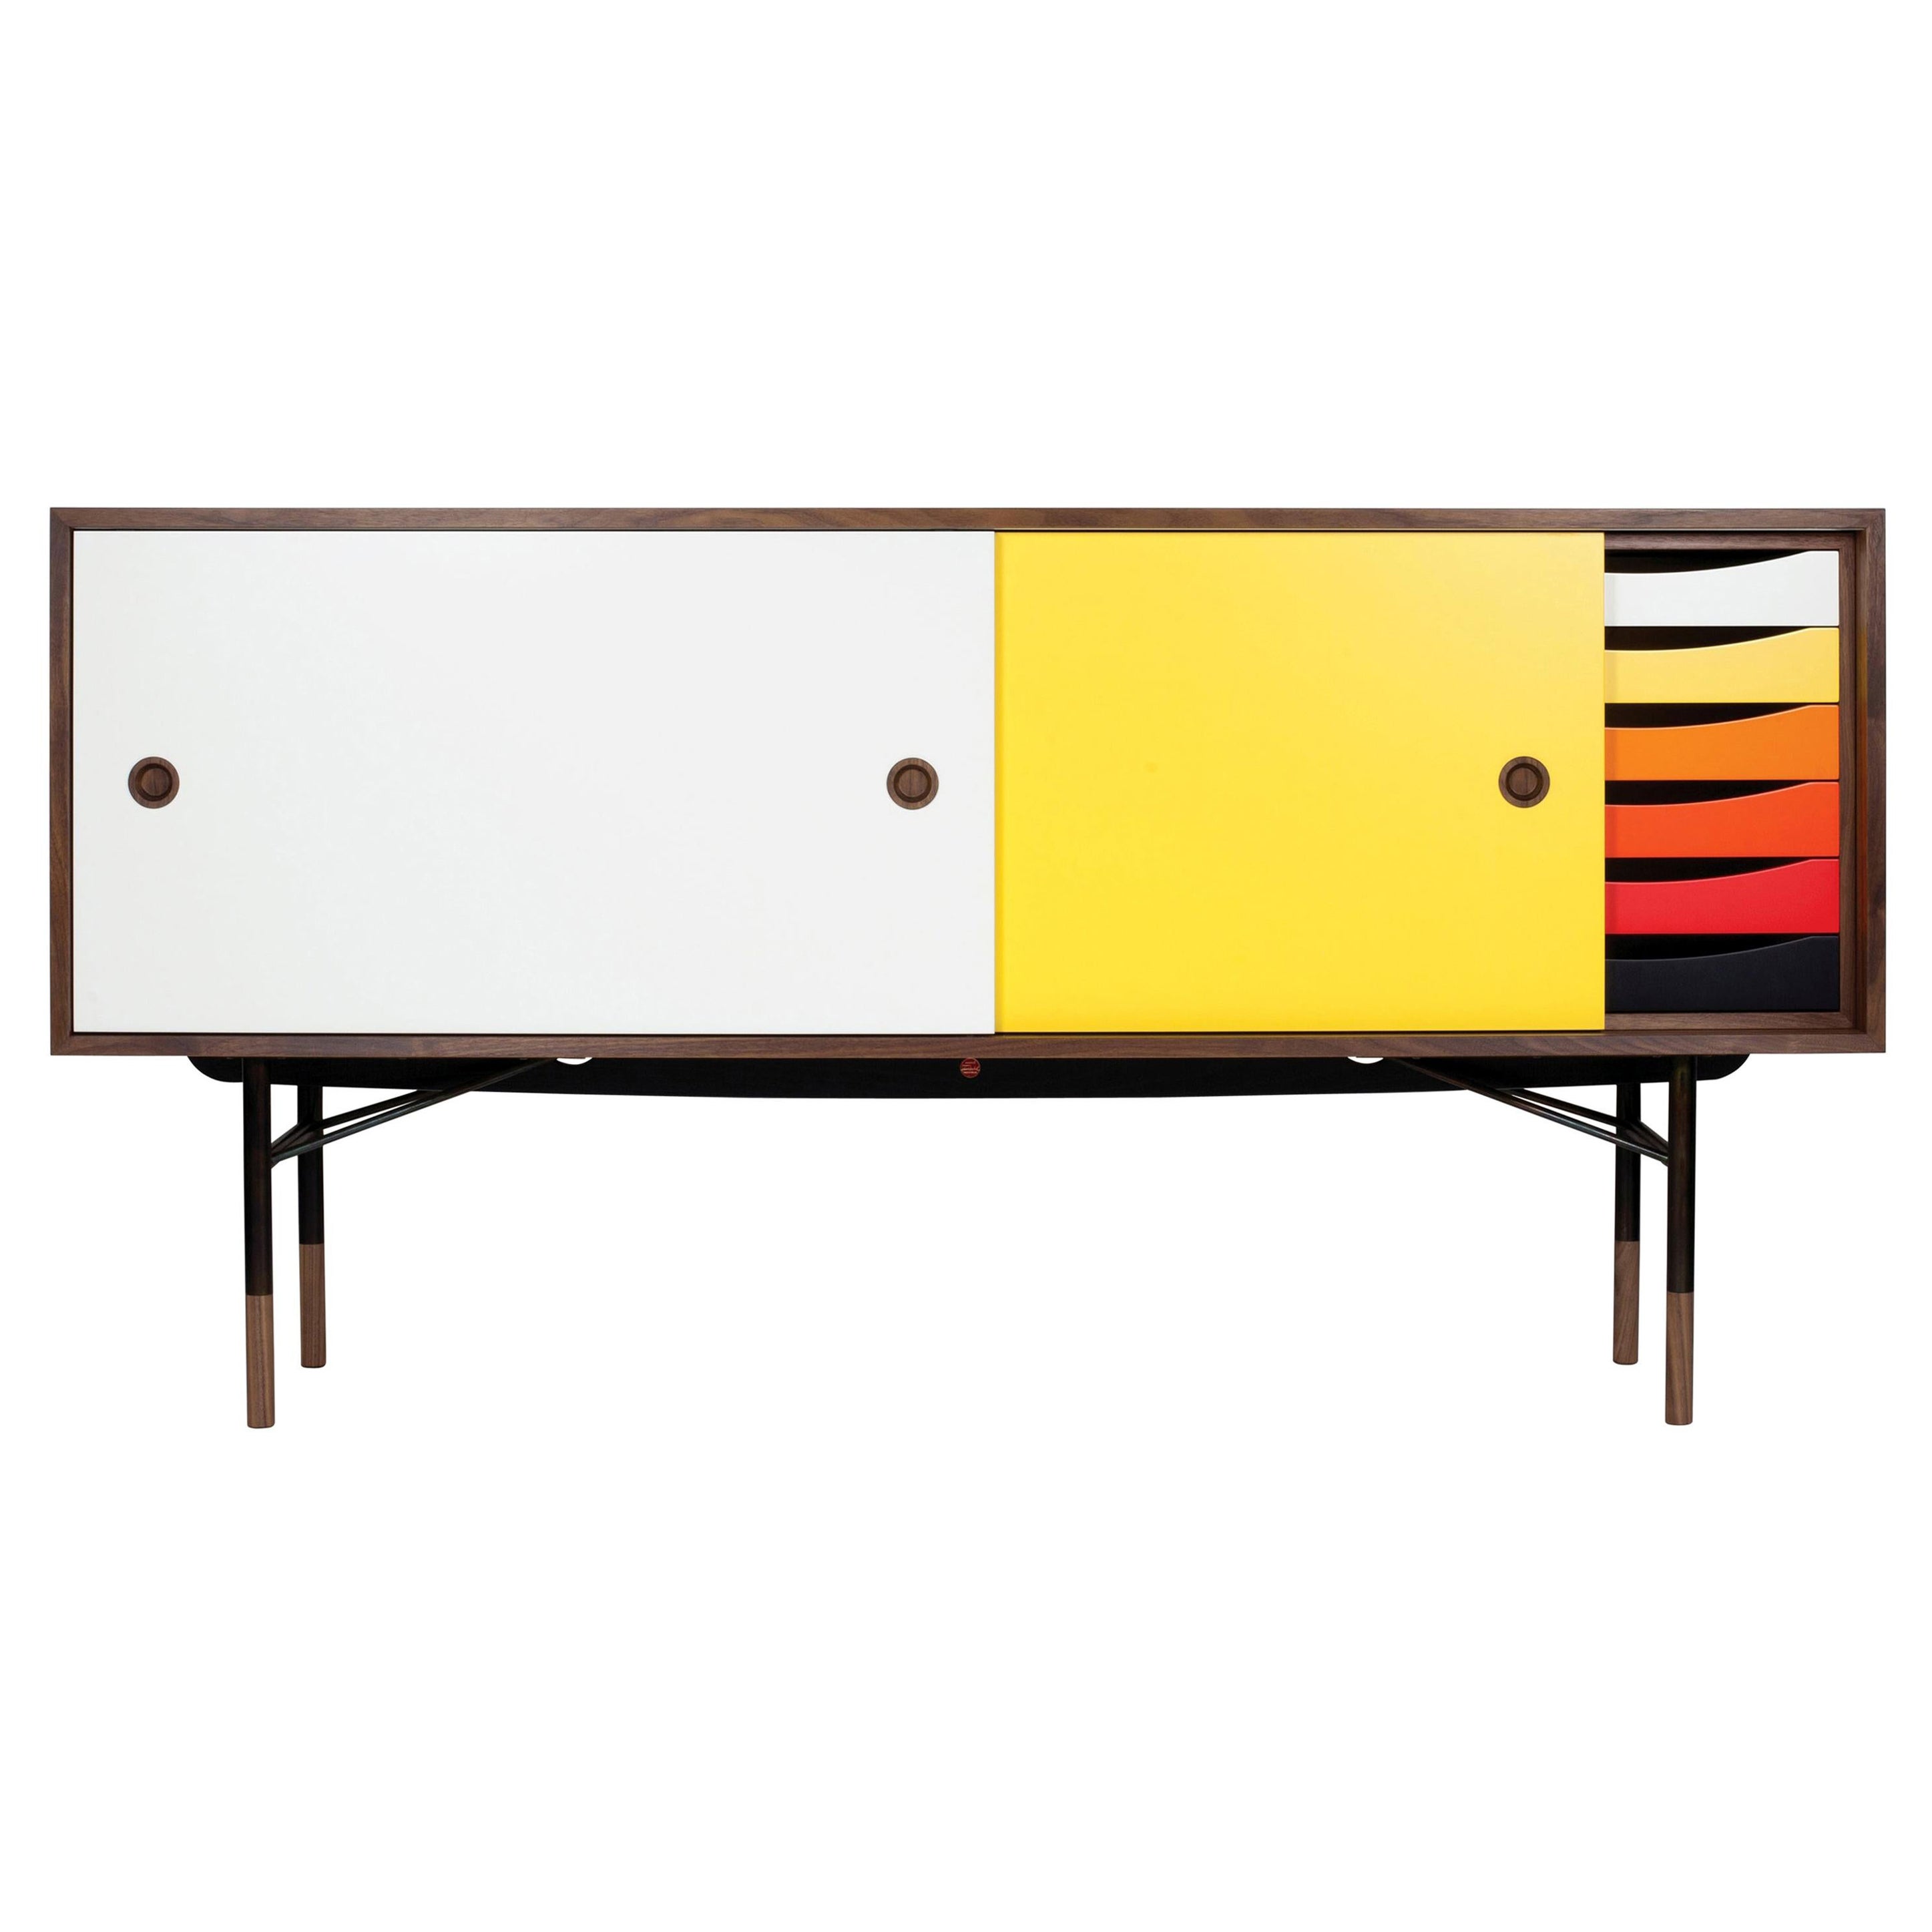 Finn Juhl Sideboard in Wood and Warm Colors with Tray Unit